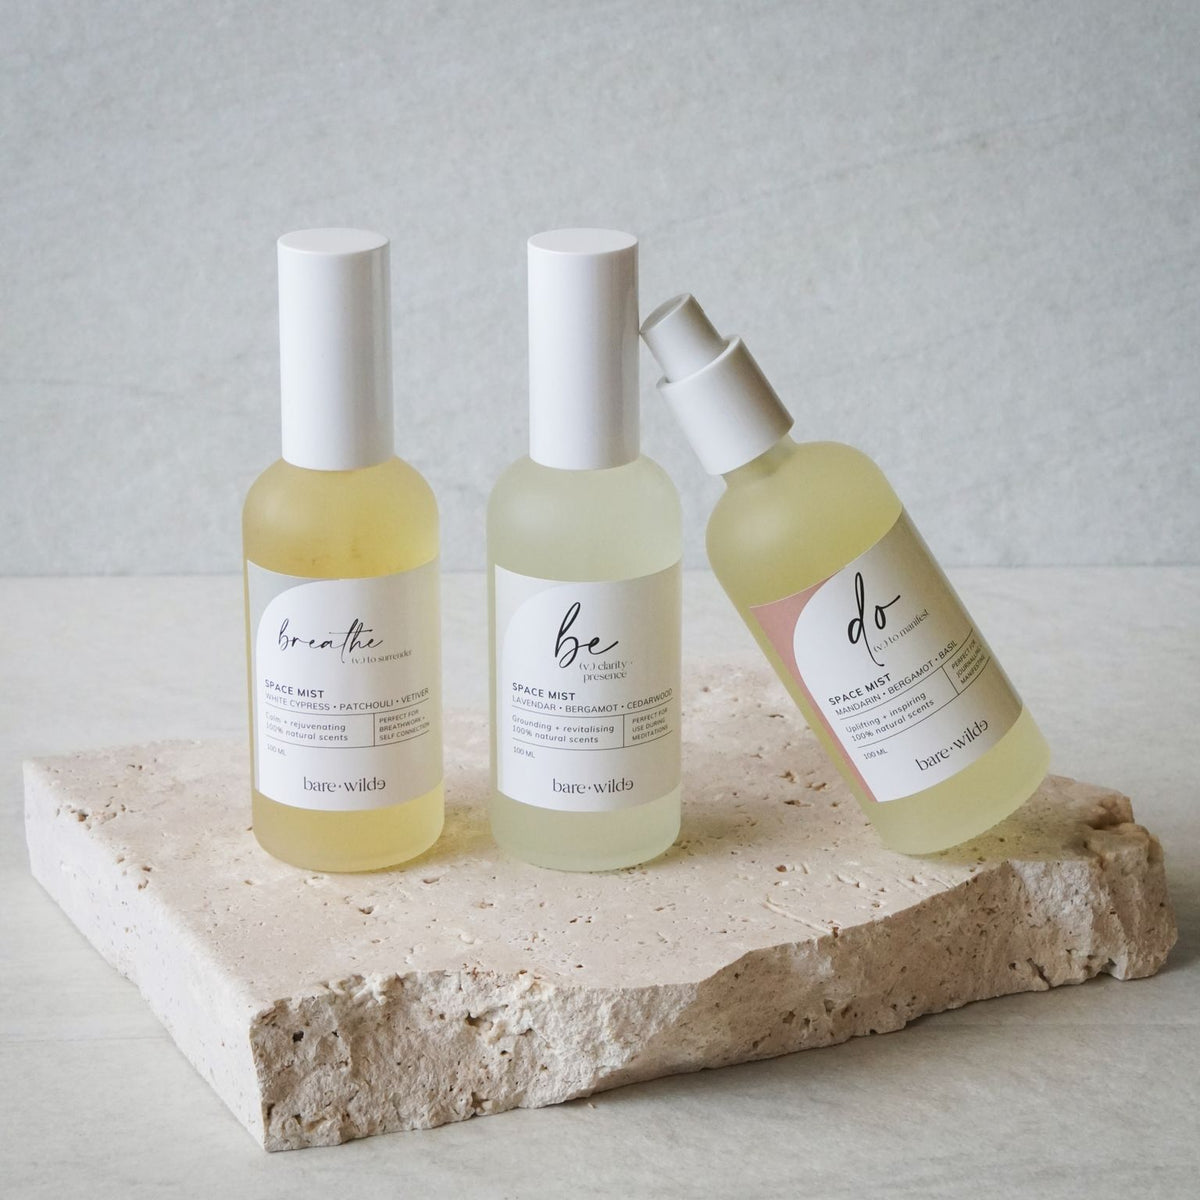 oil roller bundle of the be, do and breathe range made will all natural ingredients and essential oils